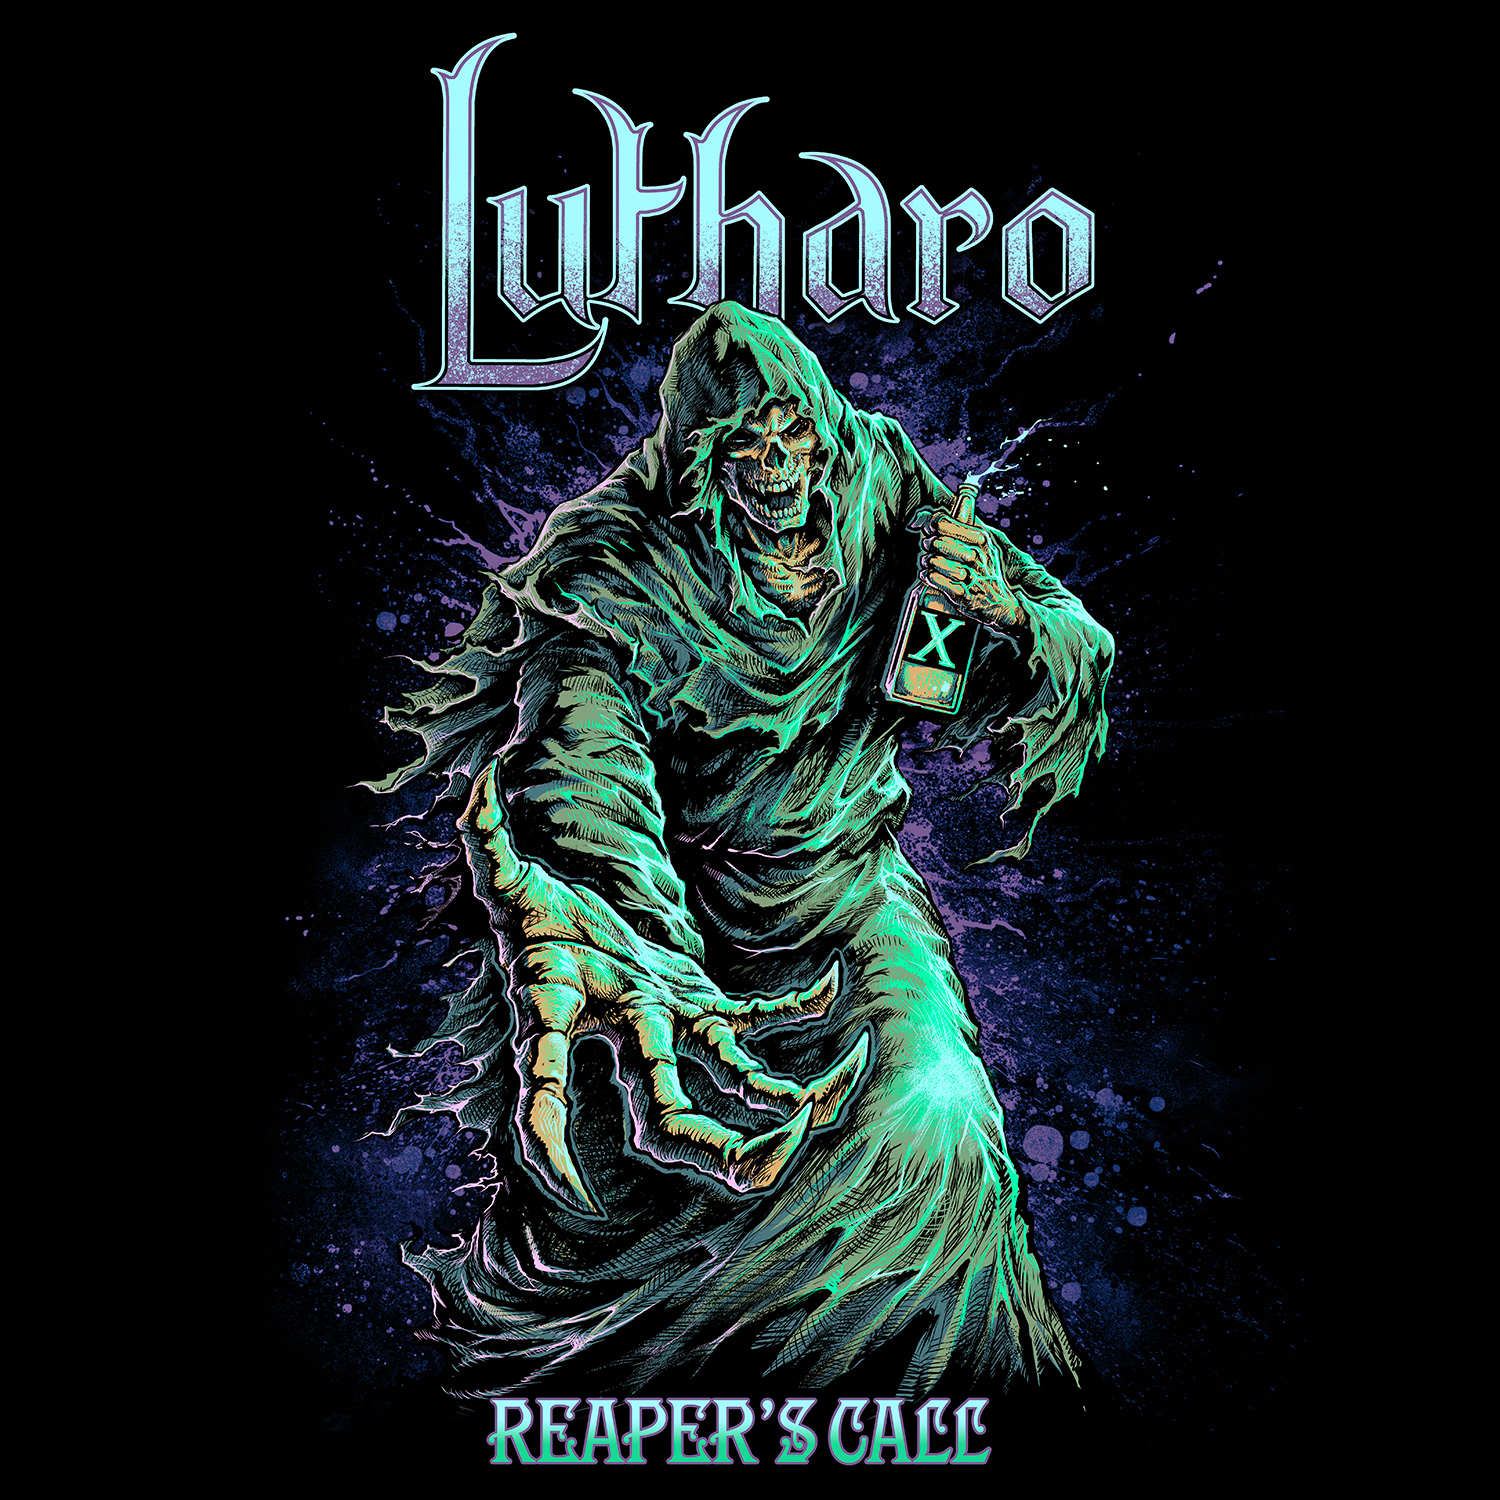 LISTEN: “Reaper’s Call” by Lutharo